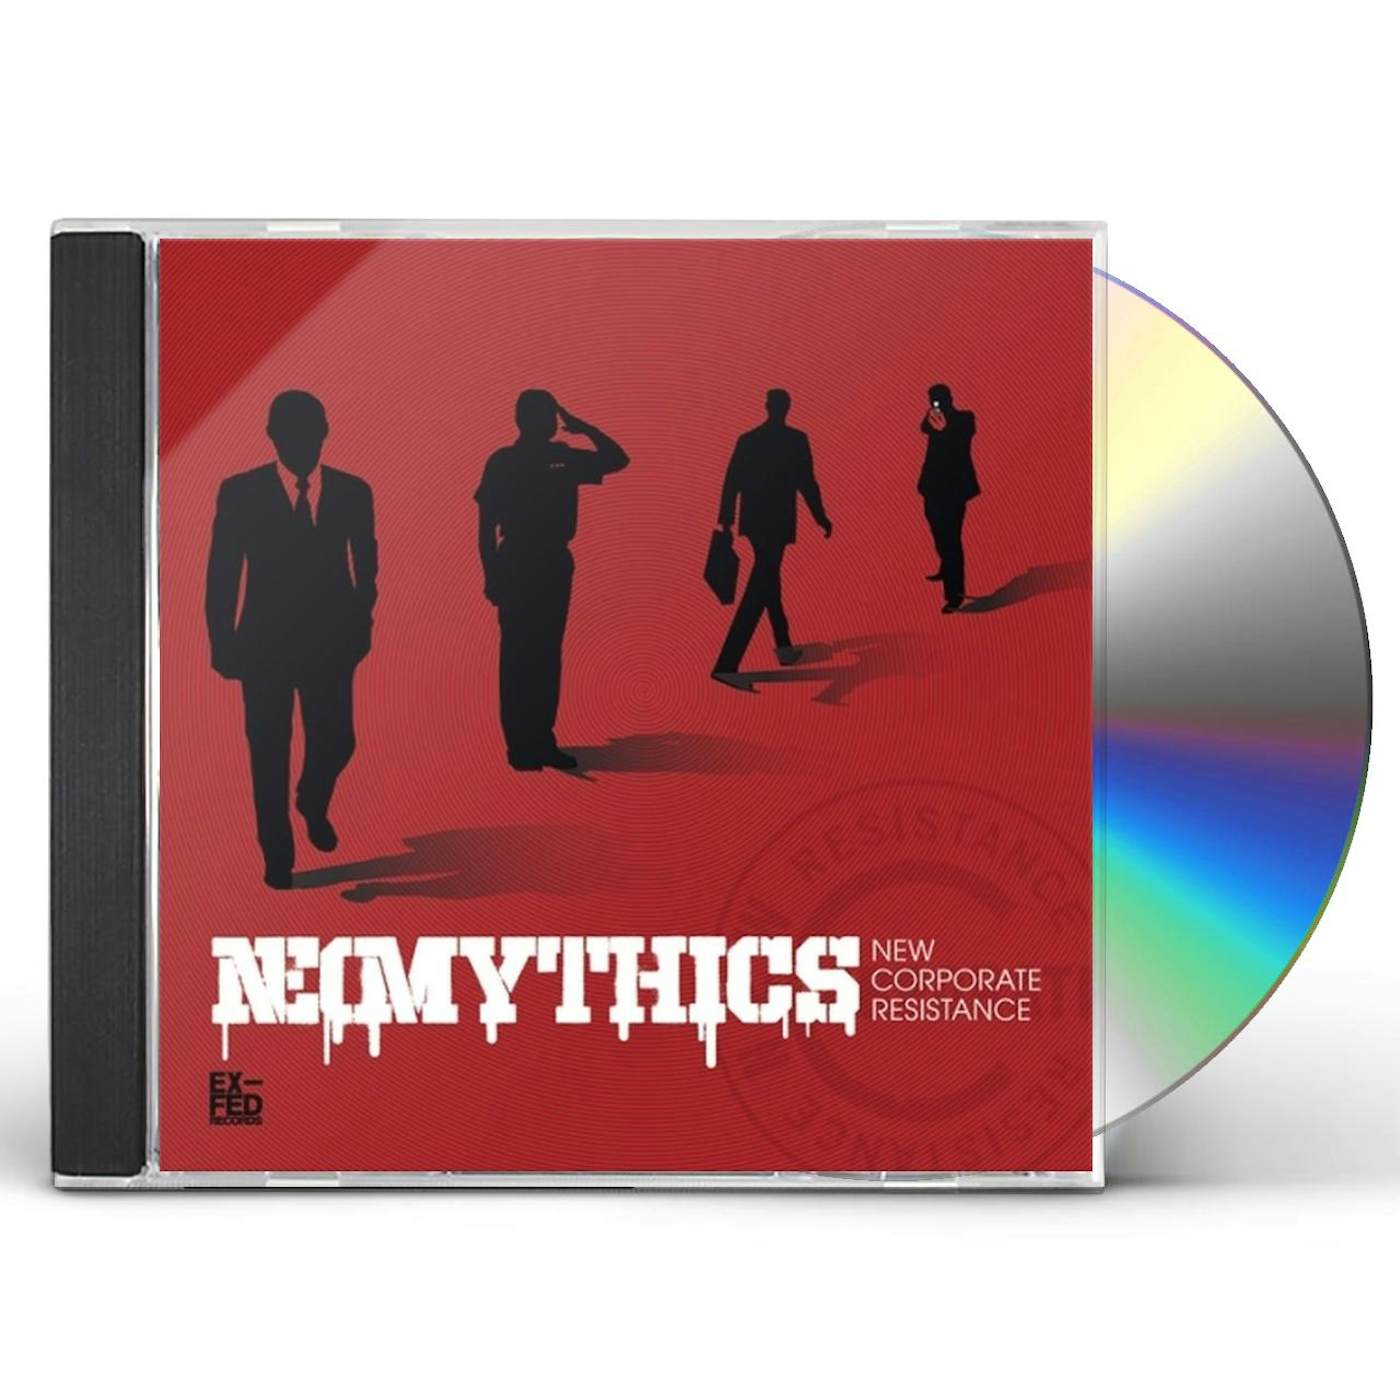 Neomythics NEW CORPORATE RESISTANCE CD